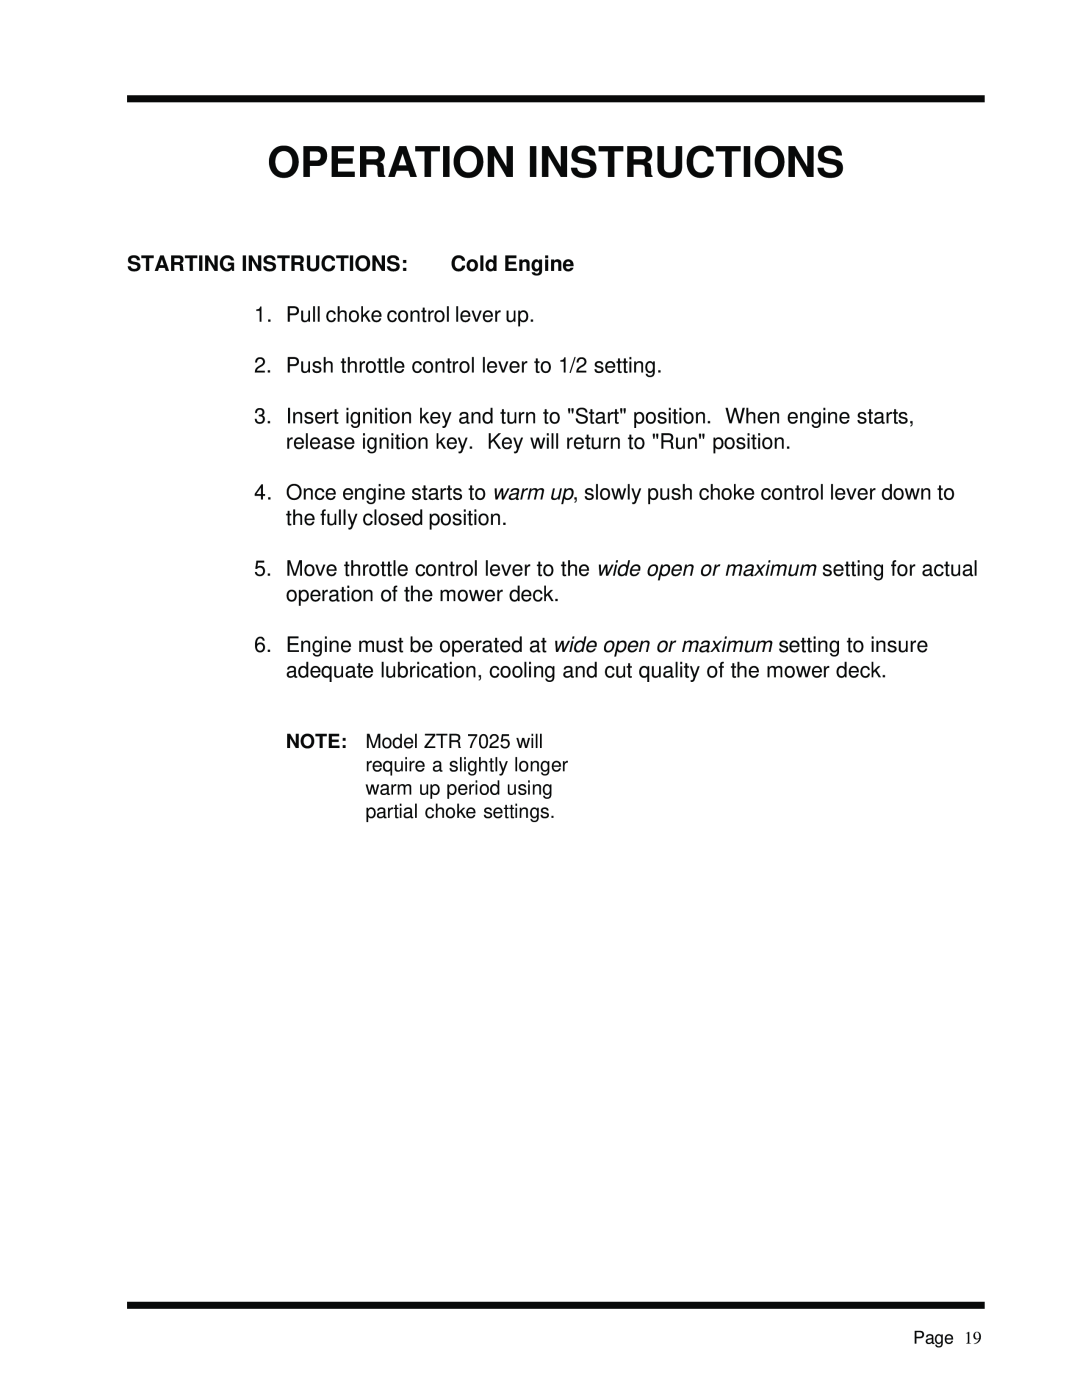 Dixon 13091-0500, ZTR 7025 manual Operation Instructions, STARTING INSTRUCTIONS Cold Engine 